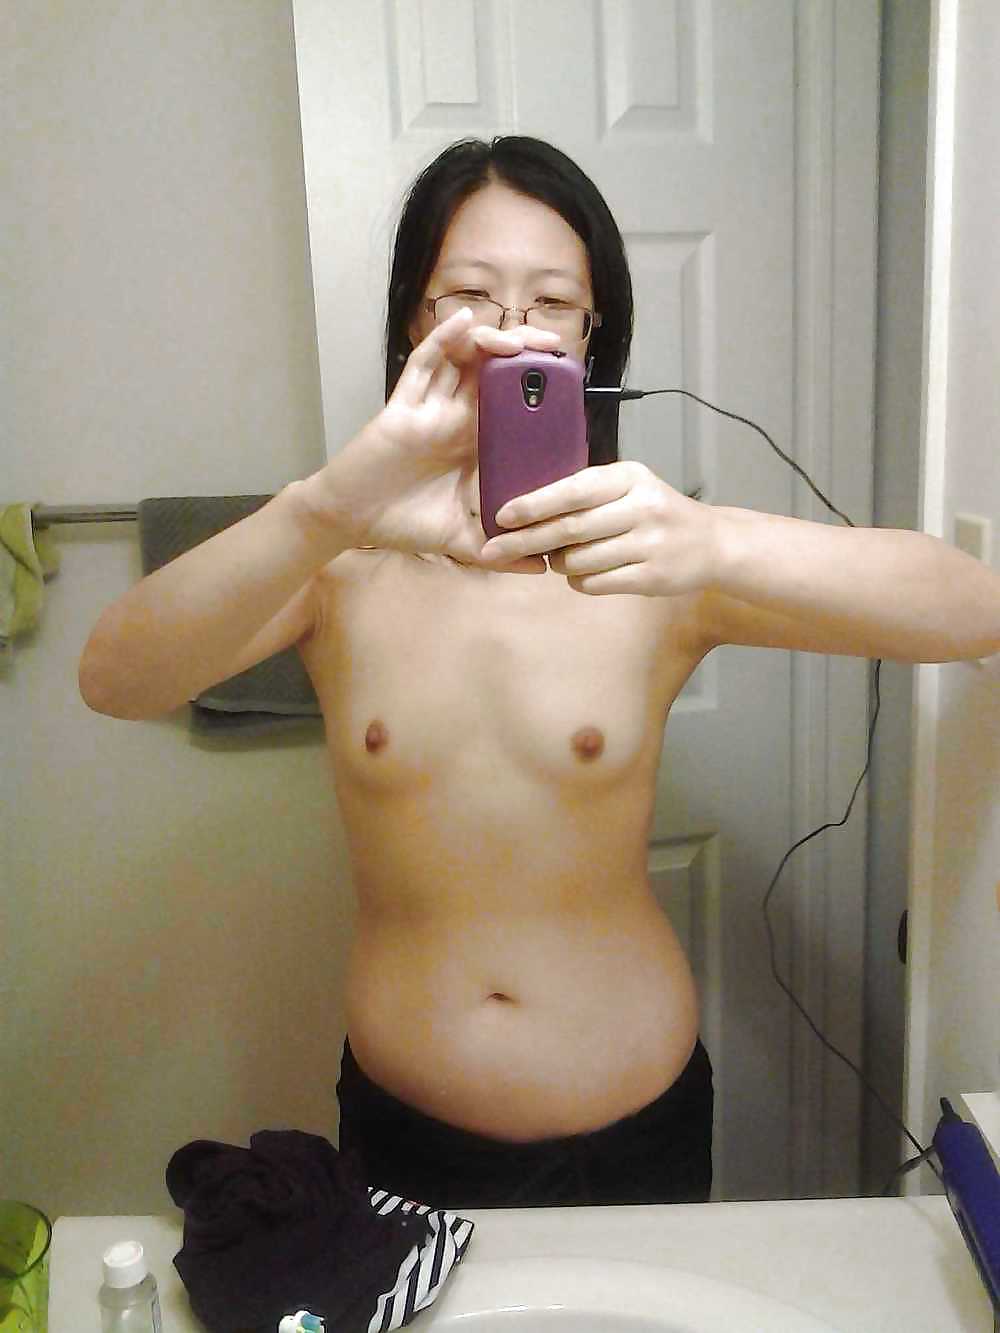 Tits !! some big some small but all natural no implants :) #15333505